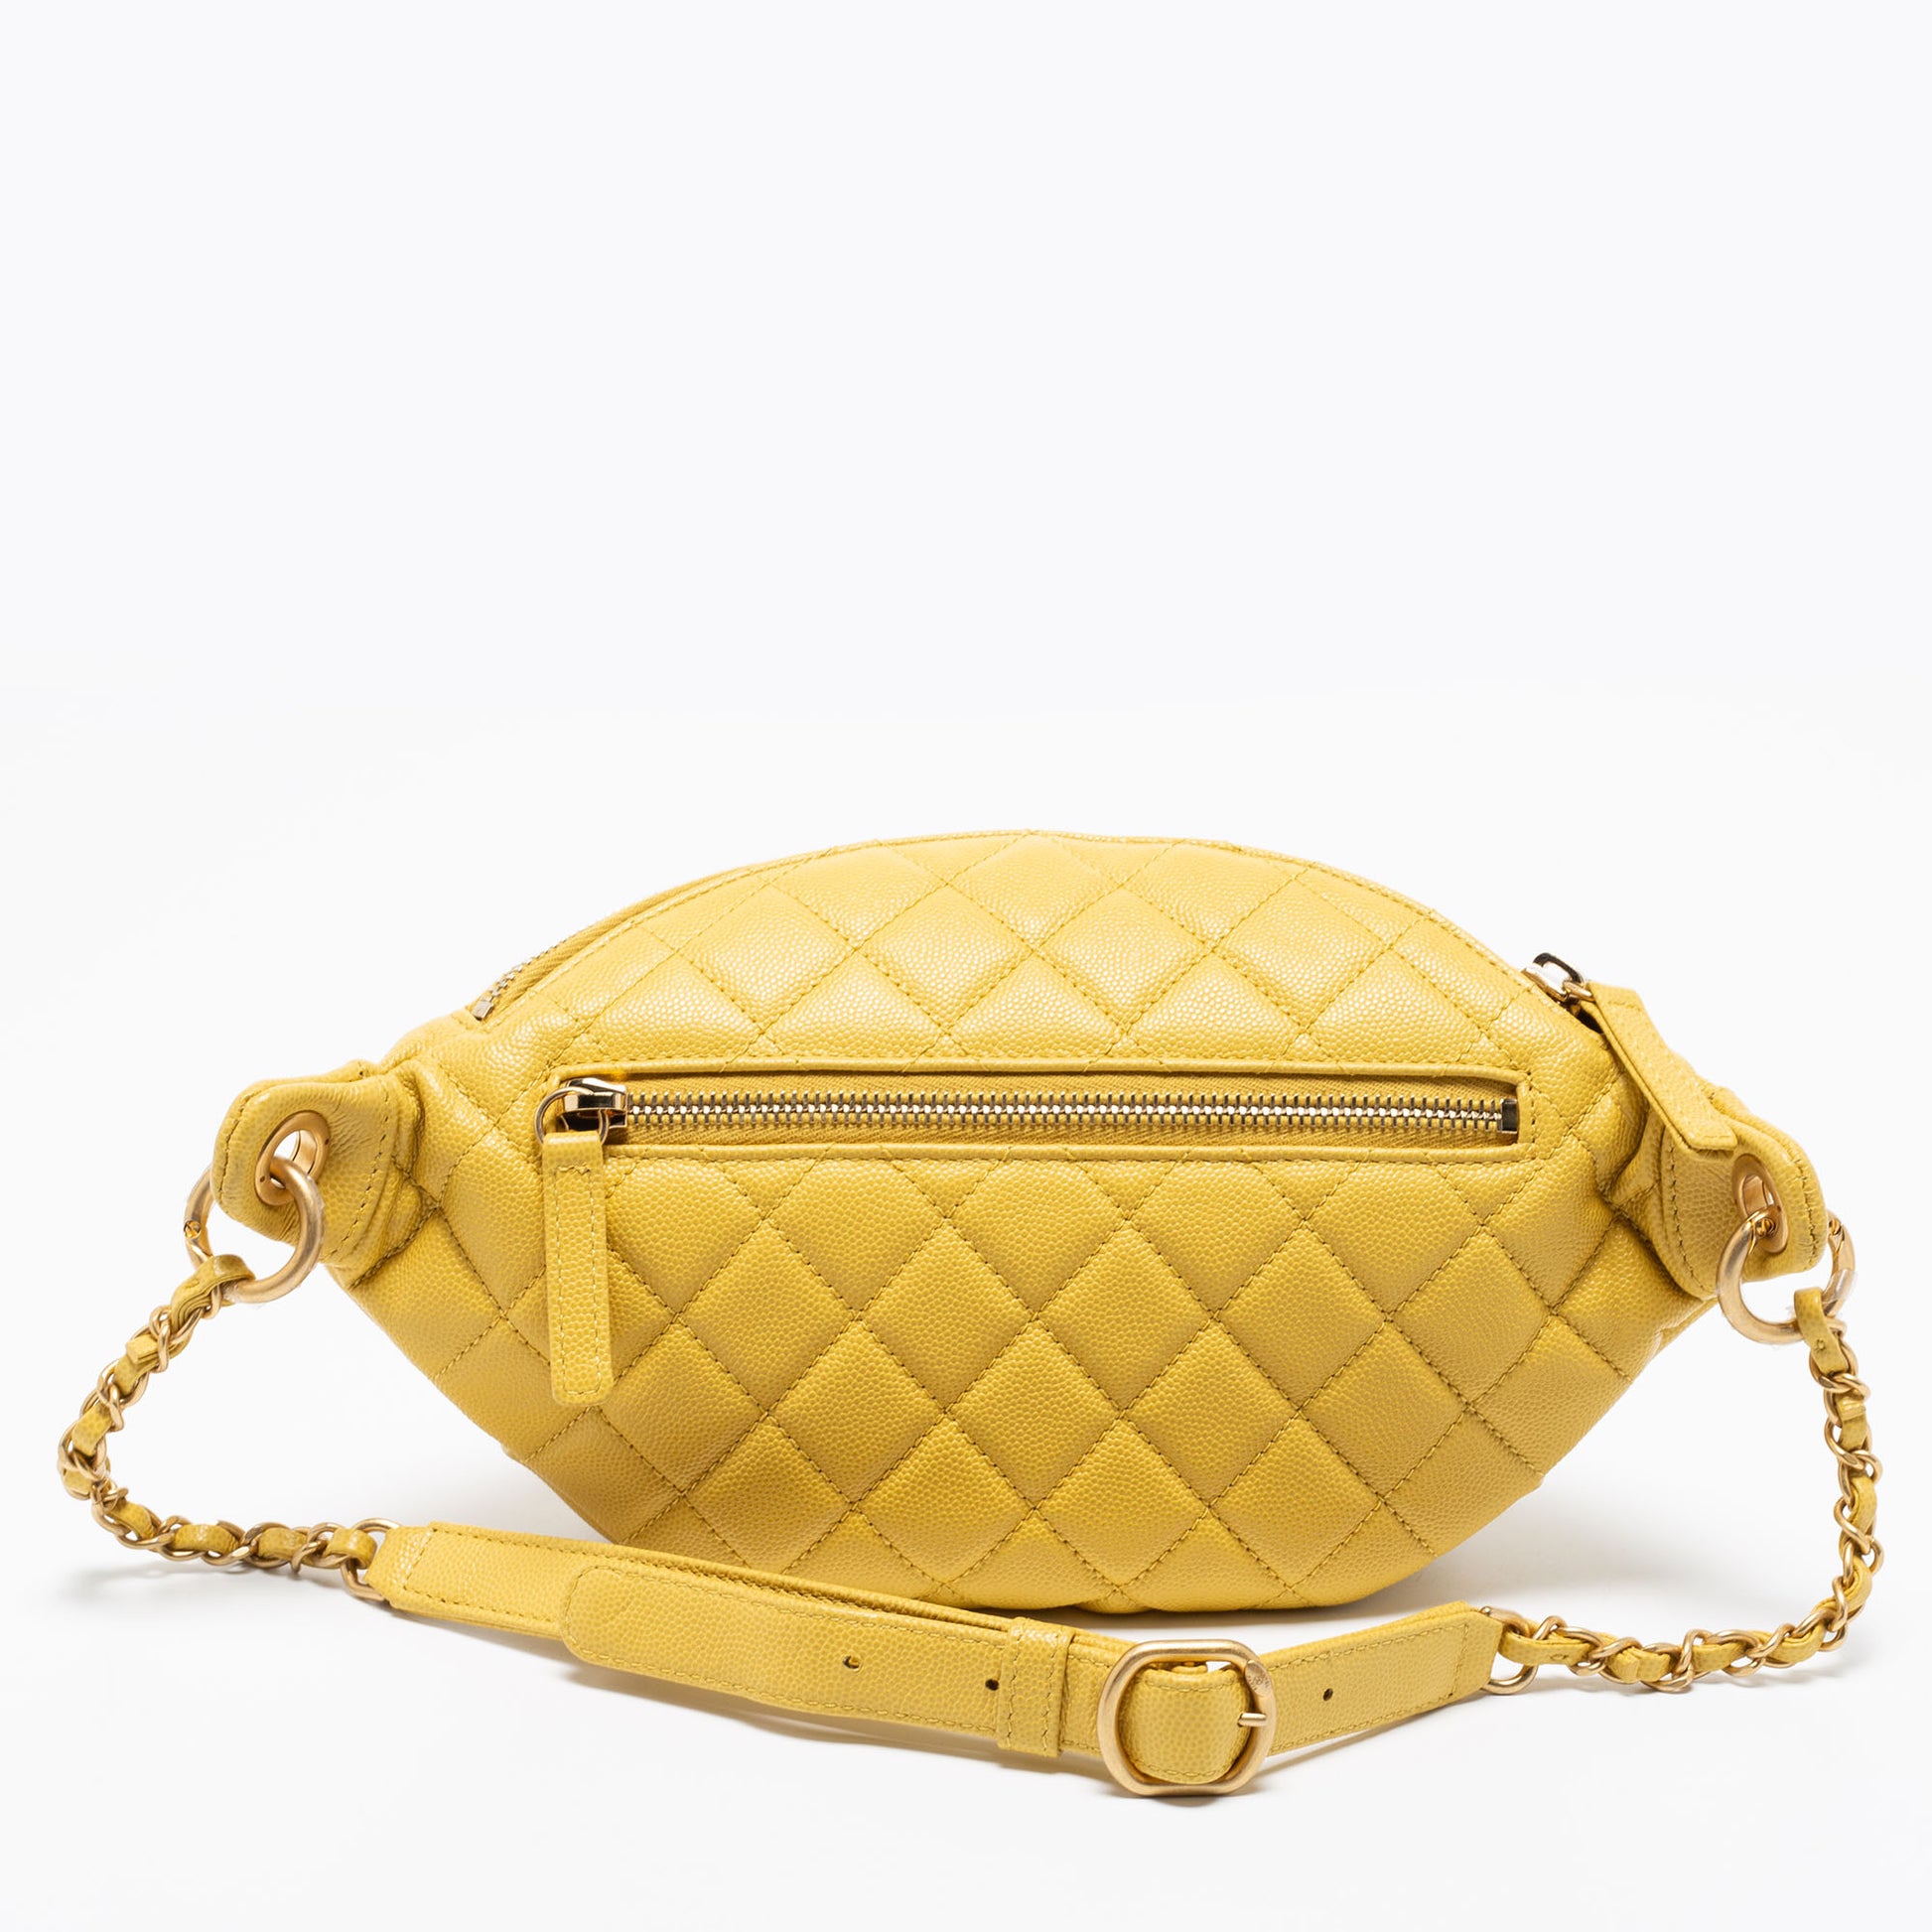 CHANEL Crumpled Glazed Lambskin Quilted Waist Bag Fanny Pack